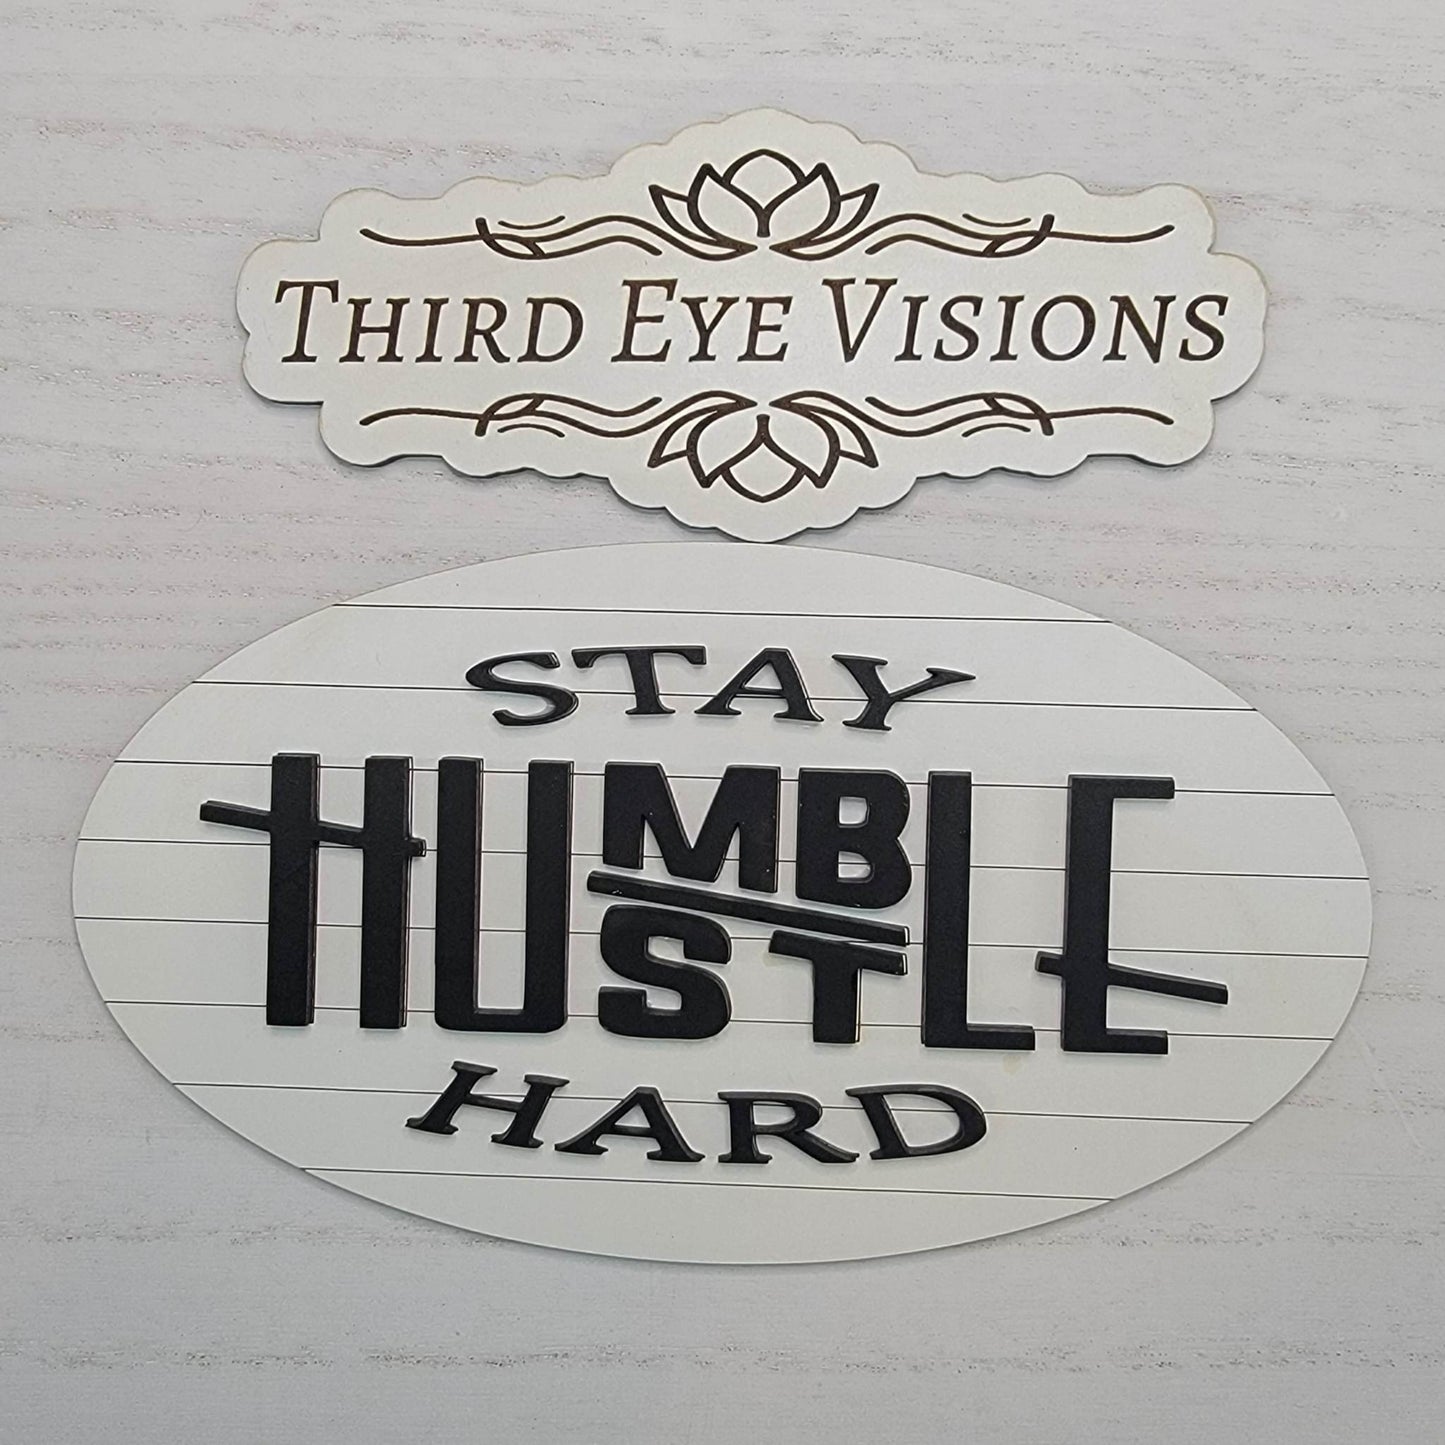 Stay Humble, Hustle Hard, Tabletop Sign, Counter Sign, Positive Saying Sign, Gift For Him, Gift For Her, Uplifting Saying, Desk Decoration